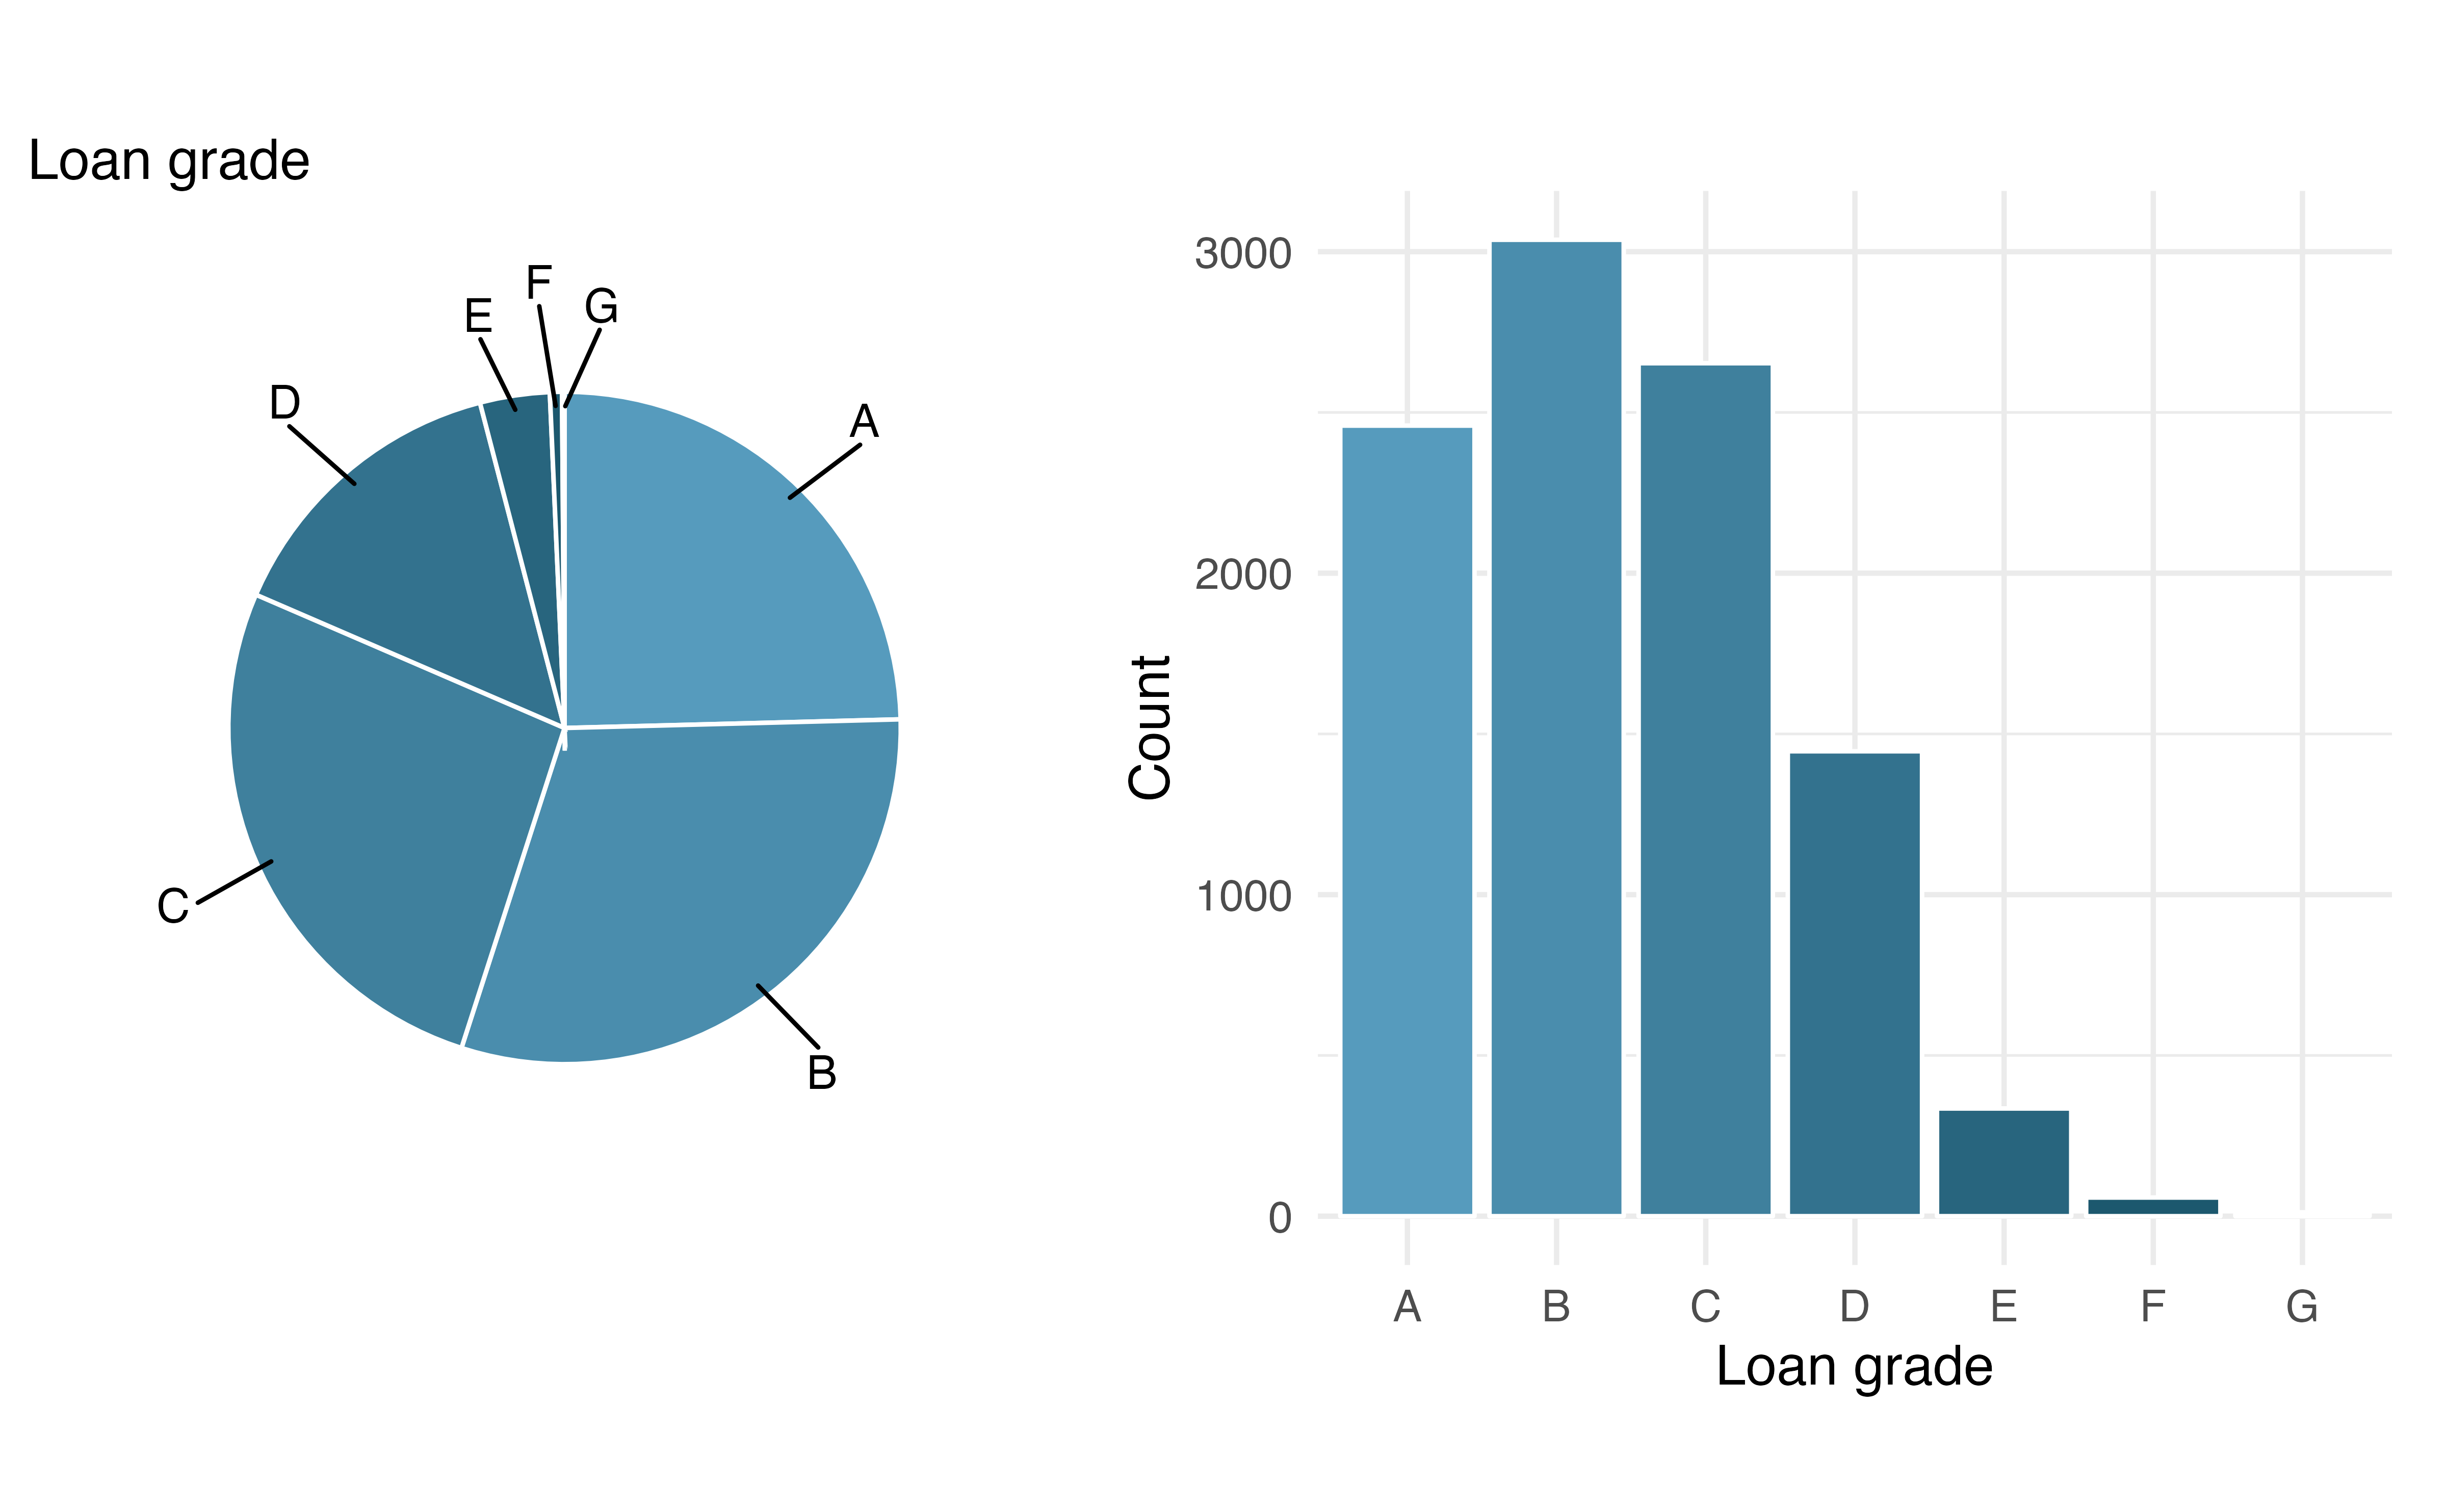 A pie chart and a bar plot of loan grades. Both plots shows that the most frequent grades are A, B, and C. The bar plot makes it easier to count the number of loans in each grade.